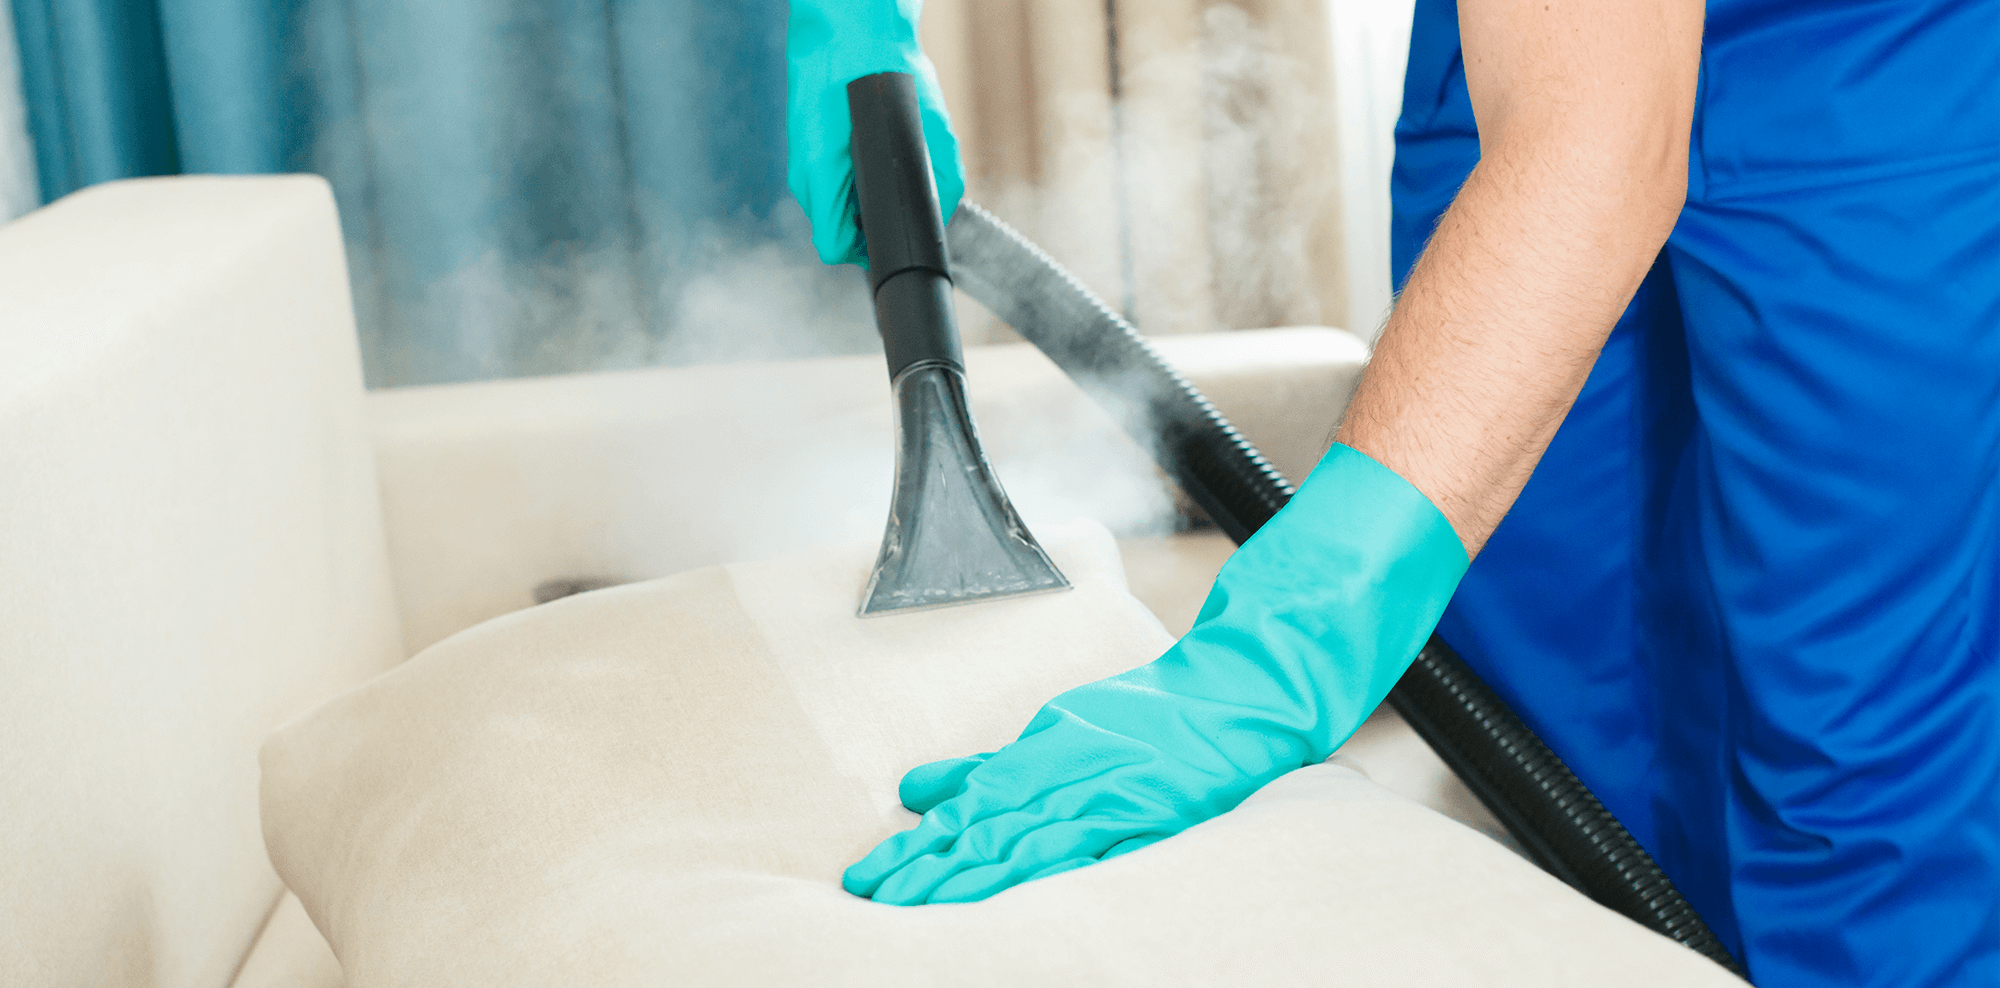 Dry cleaning of furniture and washing of carpets